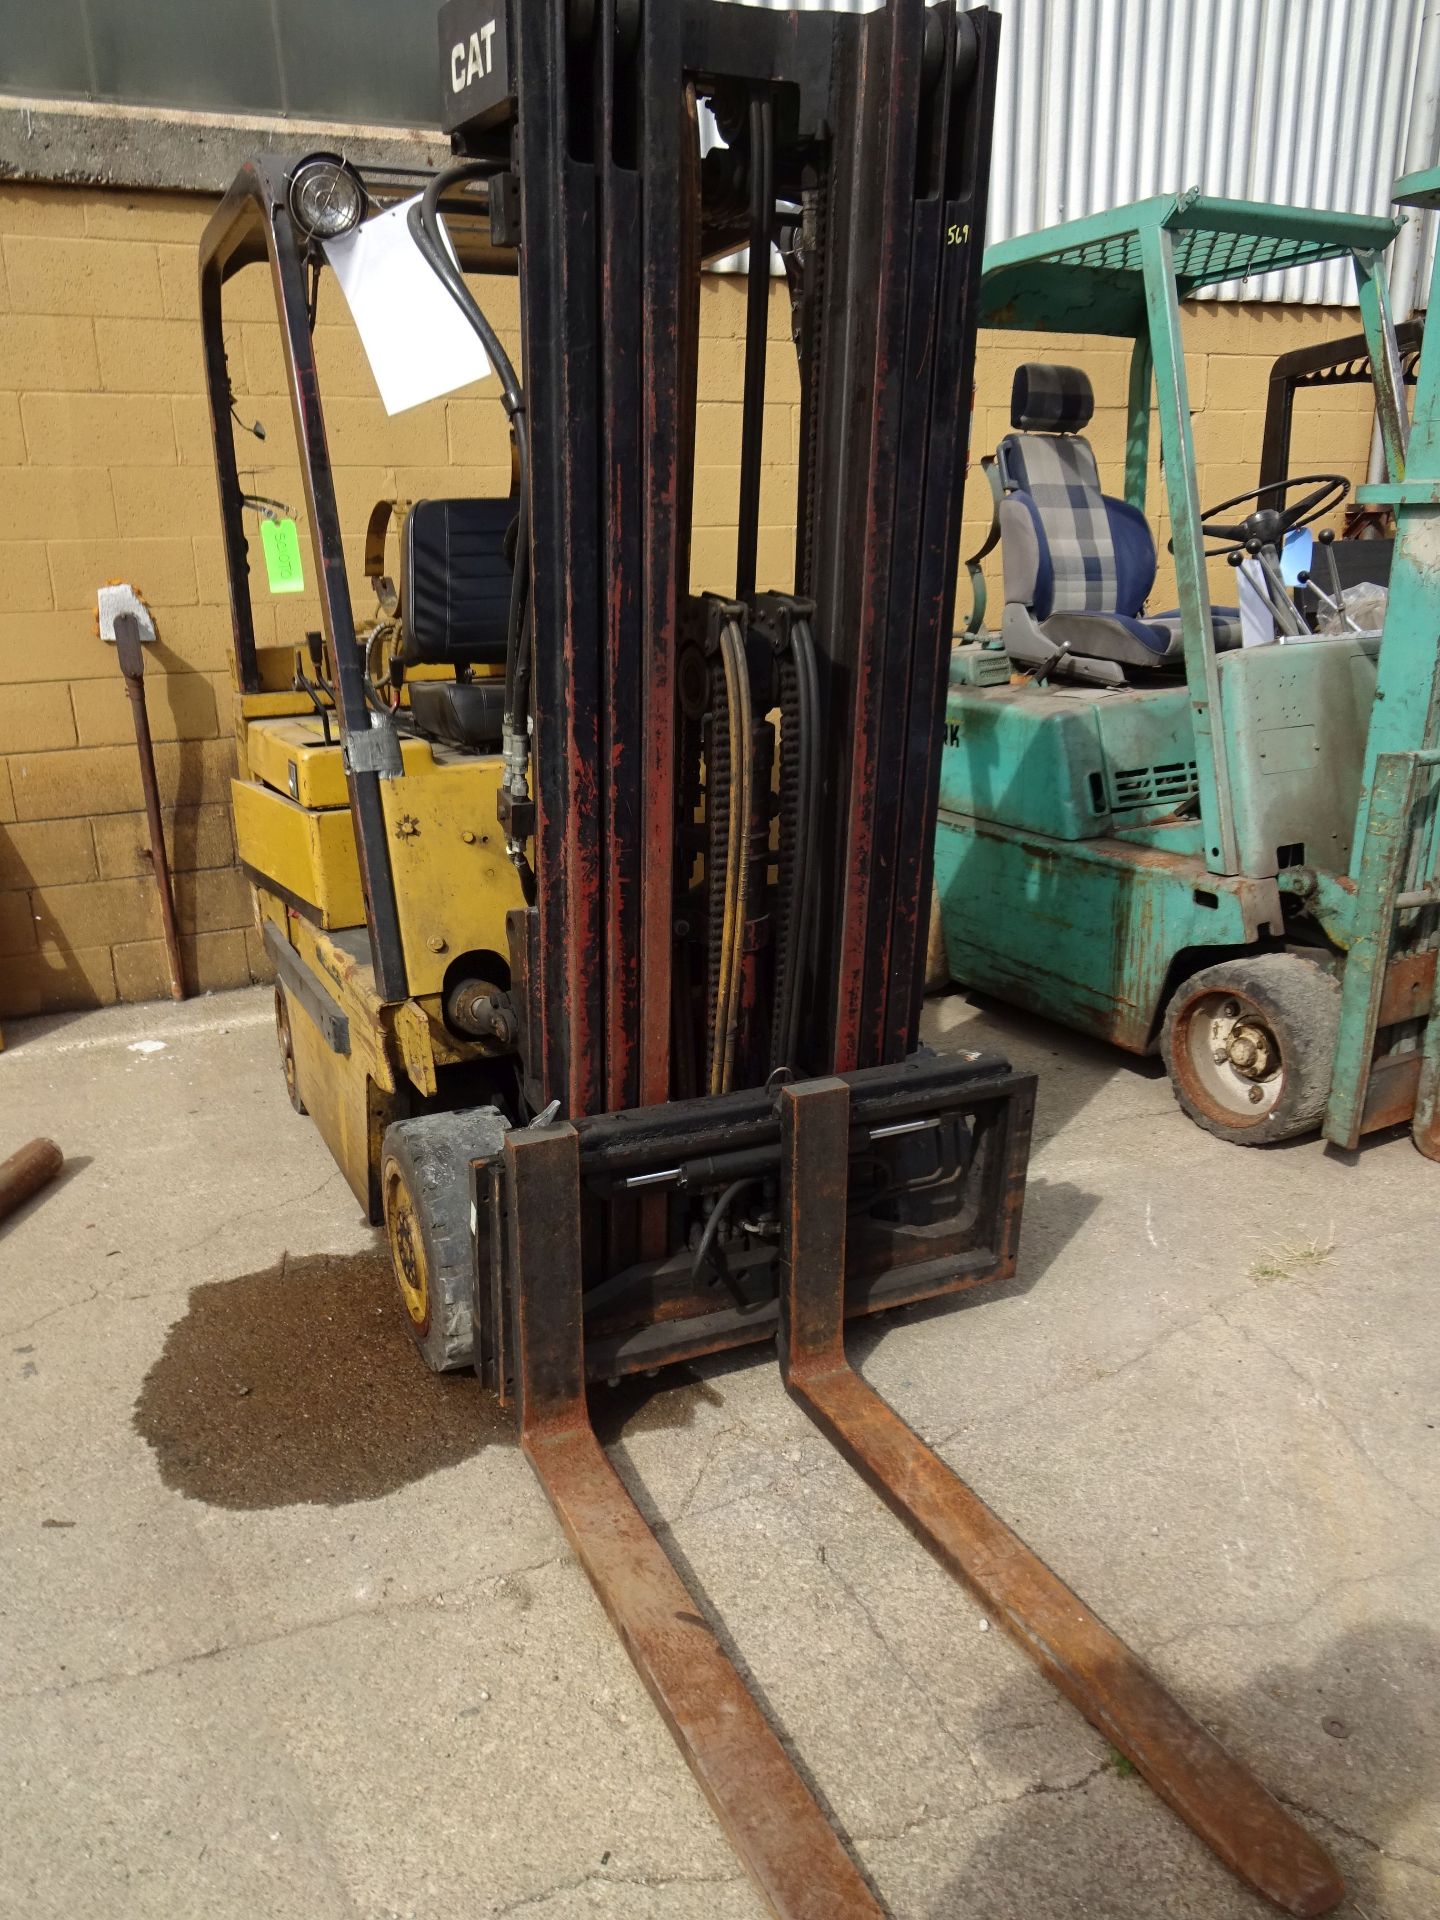 5,000 LB. CATERPILLAR MODEL T50D LP GAS SOLID TIRE LIFT TRUCK; S/N 8EB271, 3 STAGE MAST, 188 LIFT - Image 2 of 6